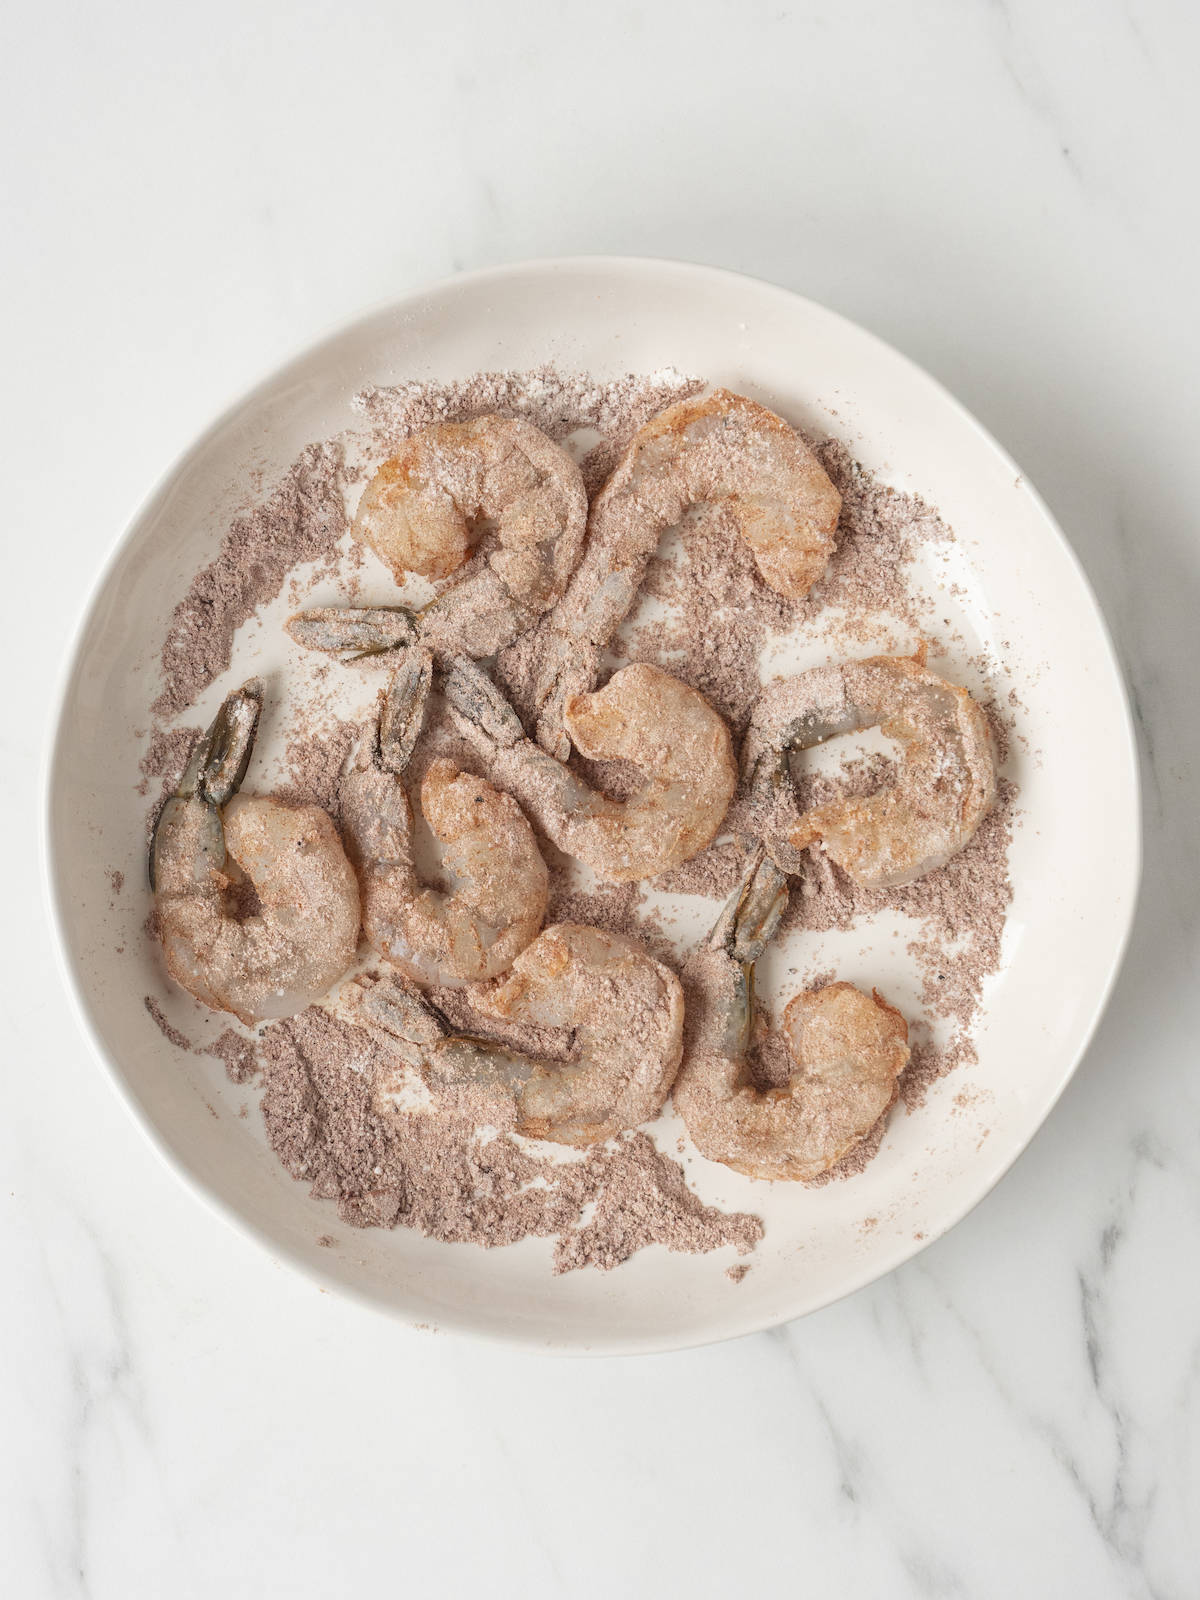 A white low bowl with shrimp coated with a flour and spice mixture.